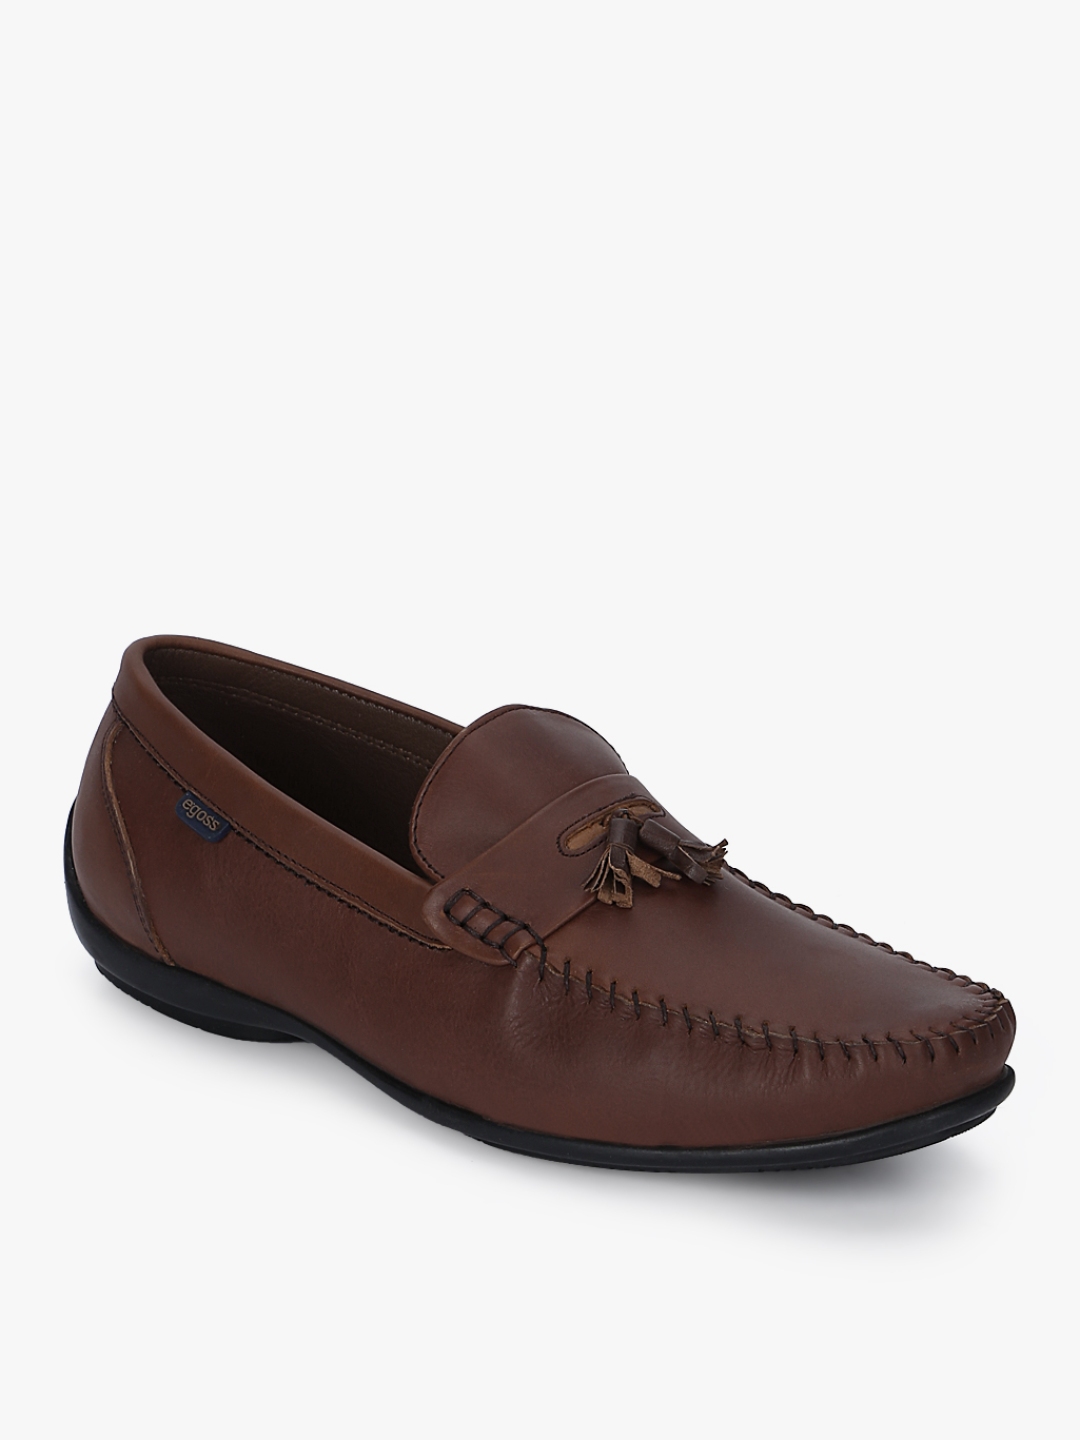 Buy Brown Loafers - Casual Shoes for Men 7686368 | Myntra